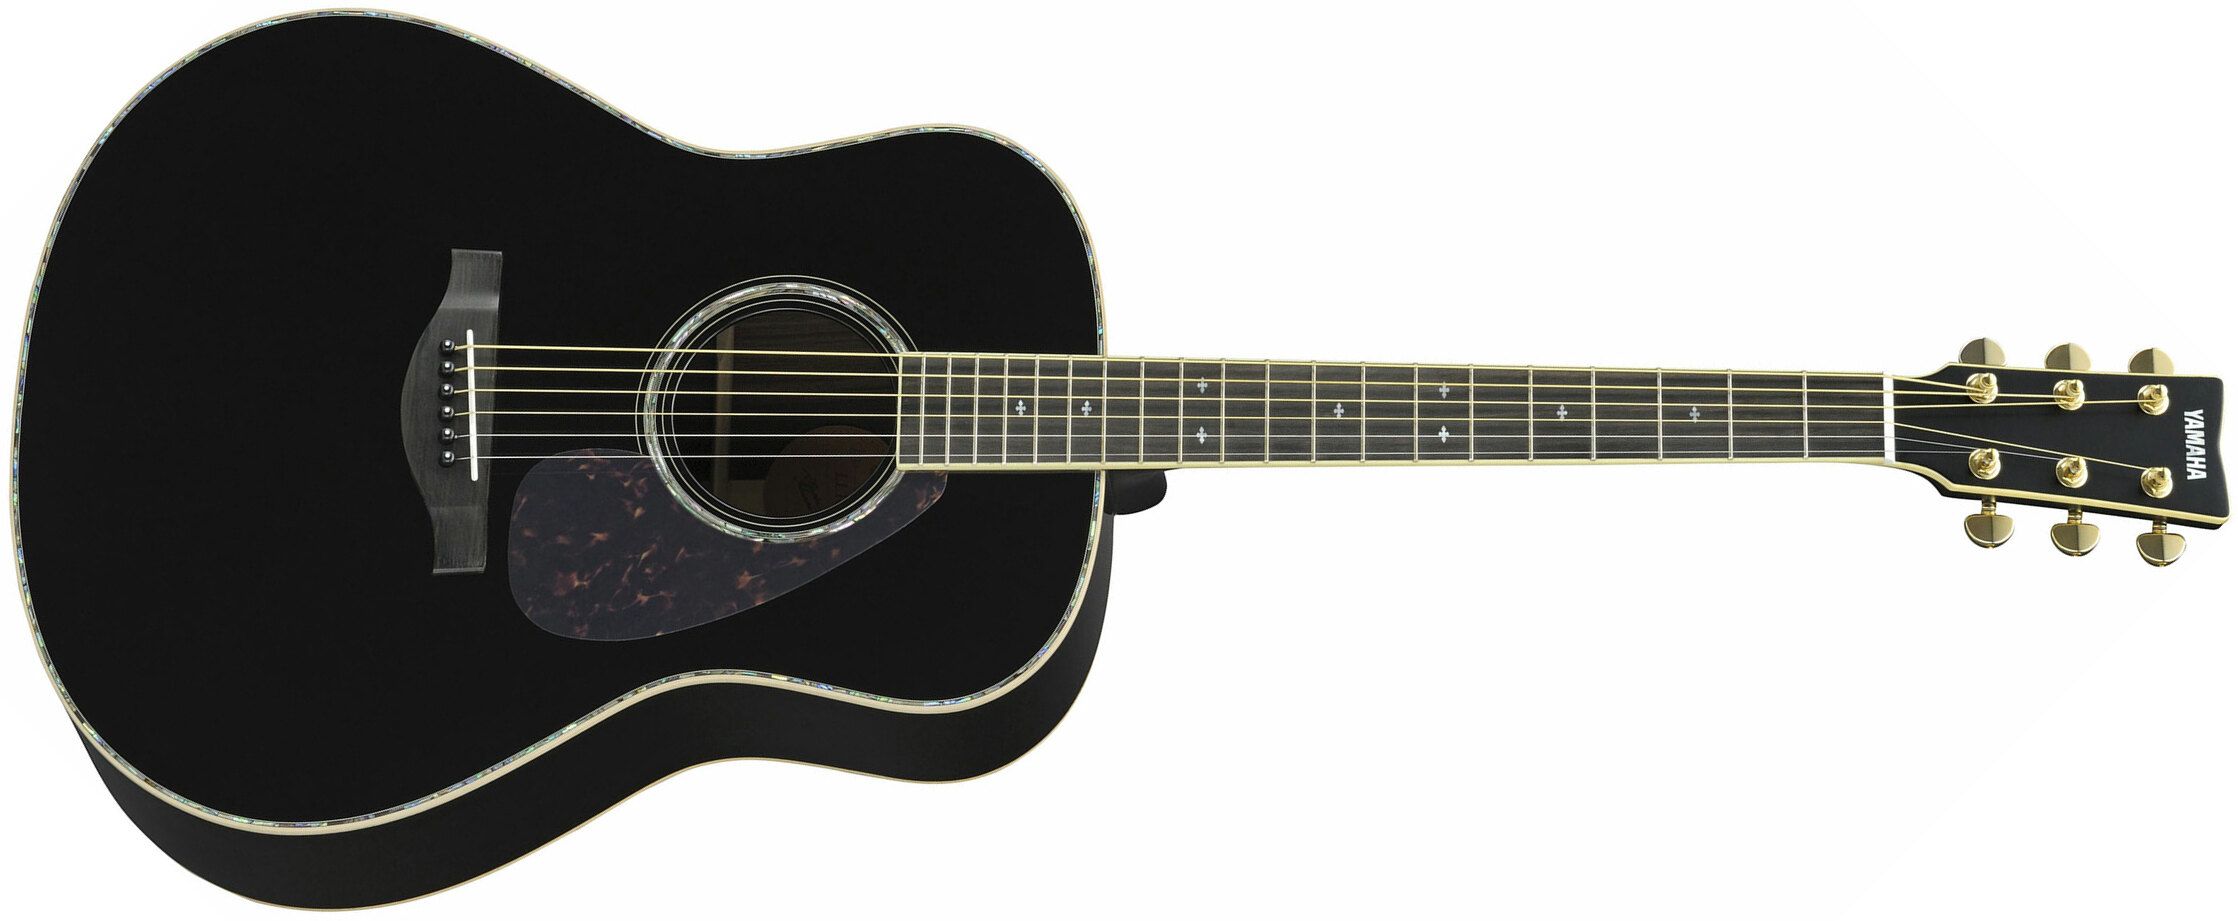 Yamaha Ll16d Are Deluxe Jumbo Epicea Palissandre Eb - Black - Guitarra electro acustica - Main picture